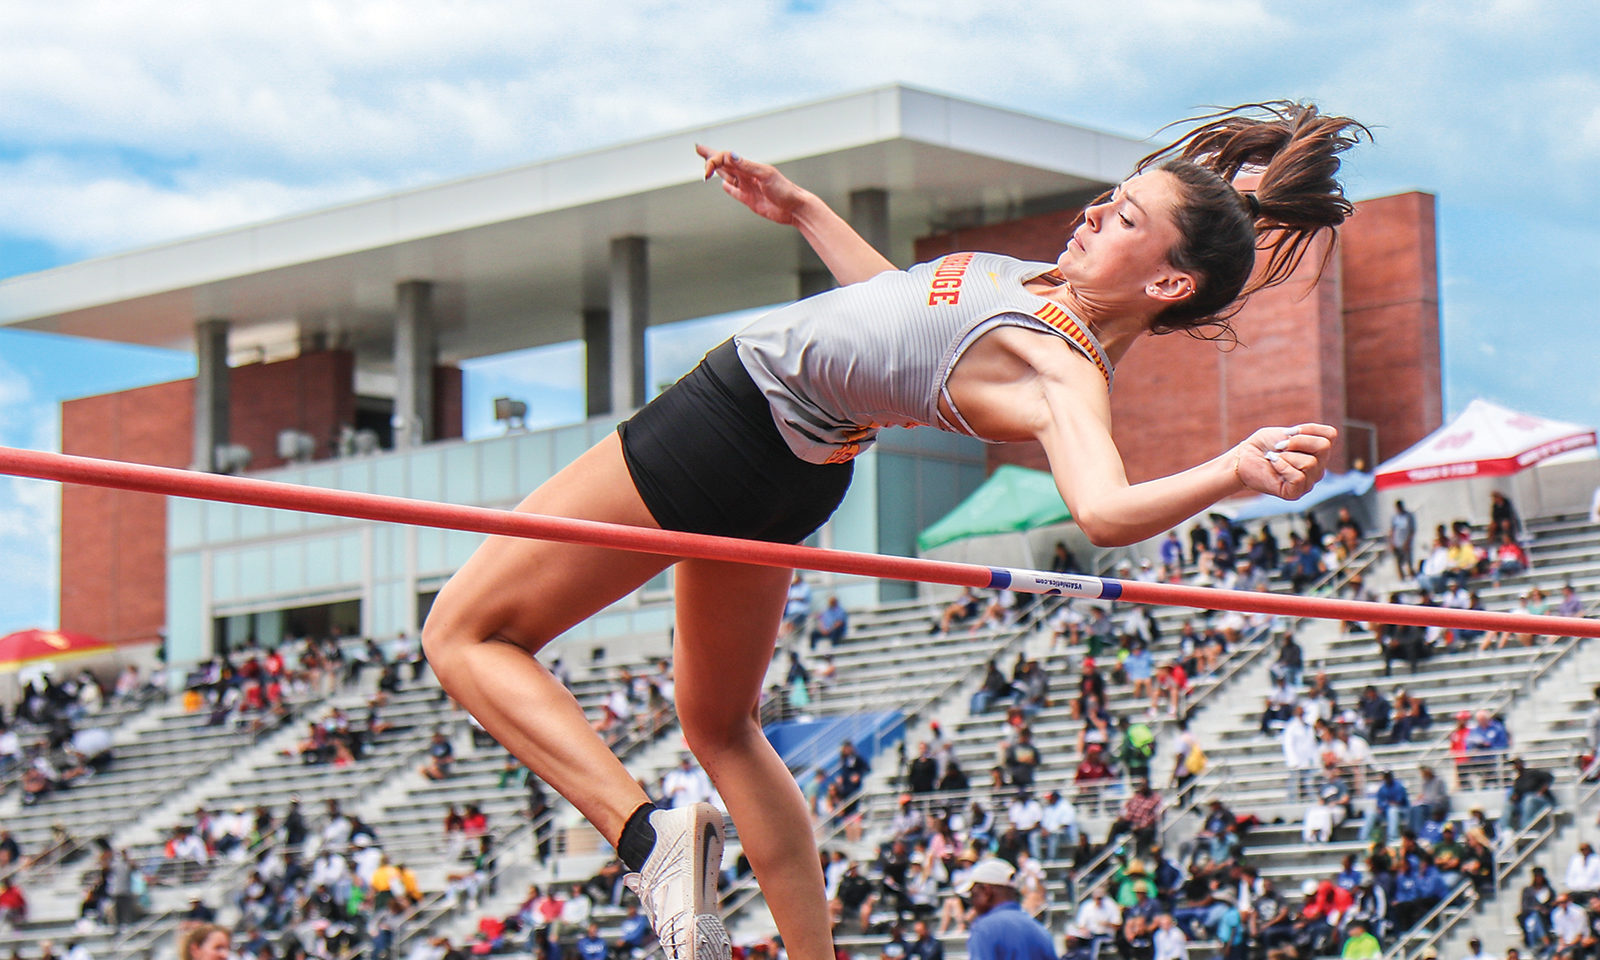 Lyon earned Pacific Coast League titles in the high jump, shown here, long jump, triple jump and 100-meter hurdles, and is on her way to Oregon State.